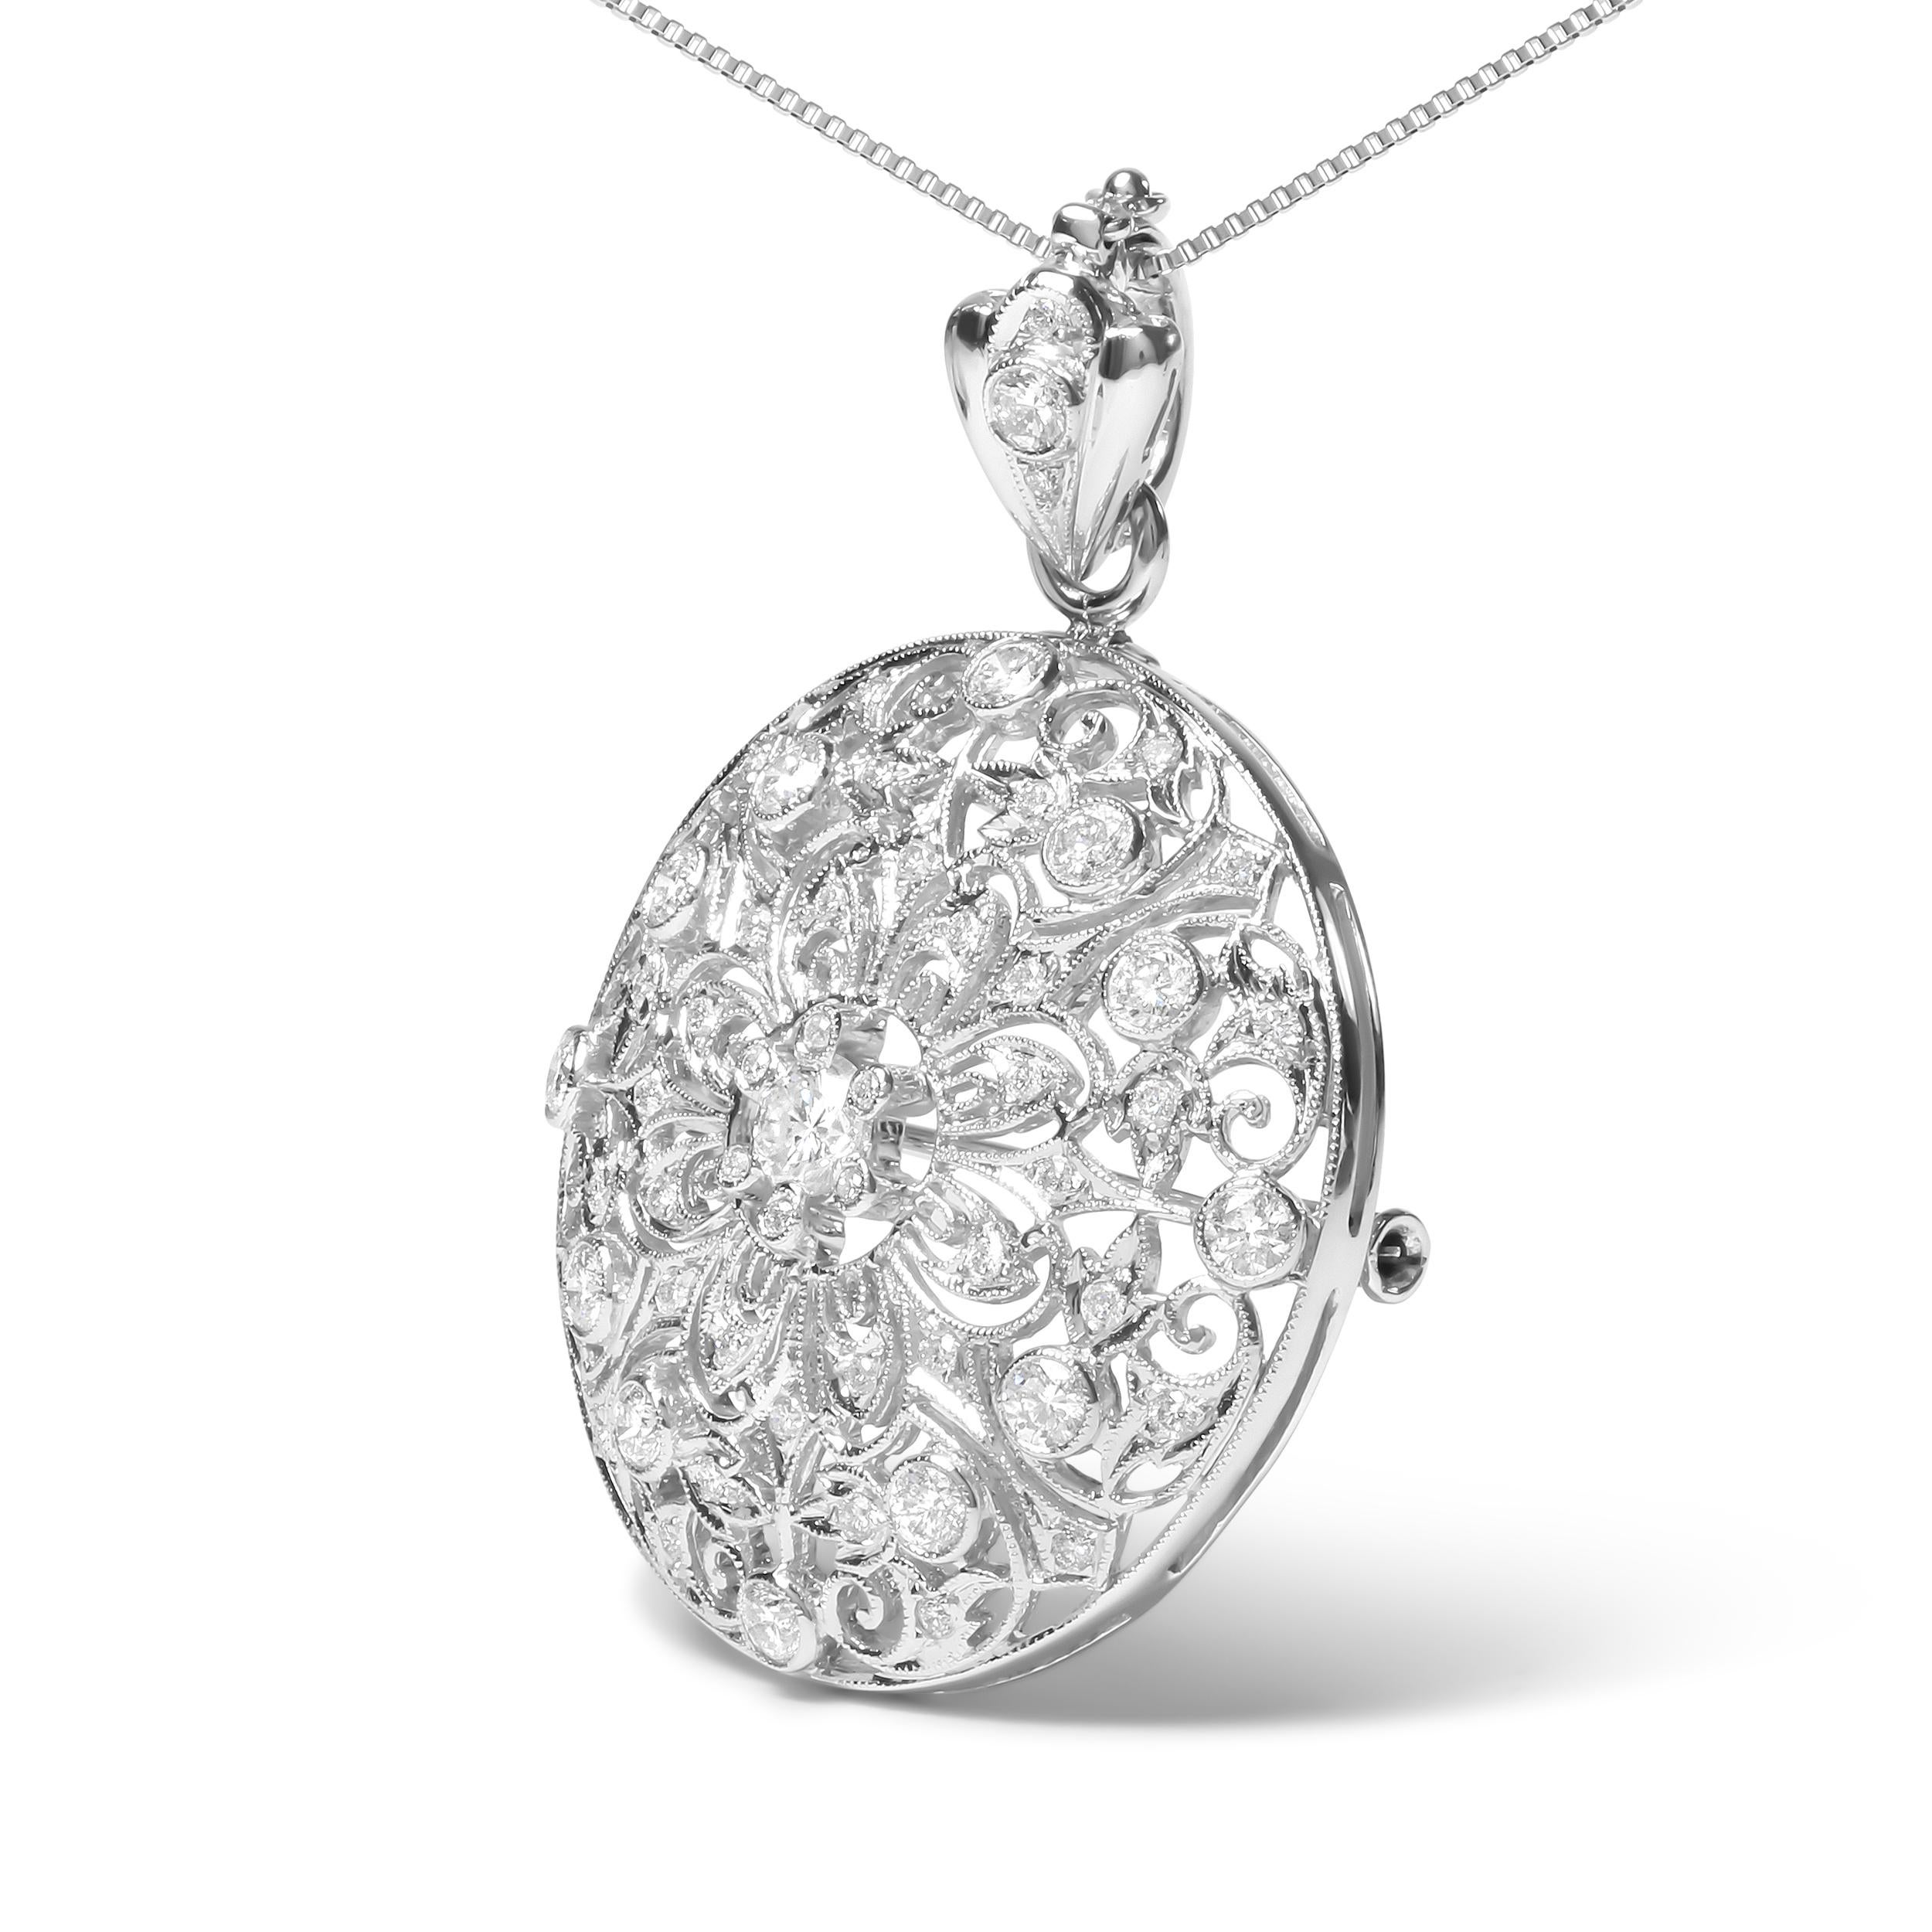 Contemporary 18K White Gold 1 5/6 Ct Diamond Floral Filigree Brooch Pin and Pendant Necklace For Sale